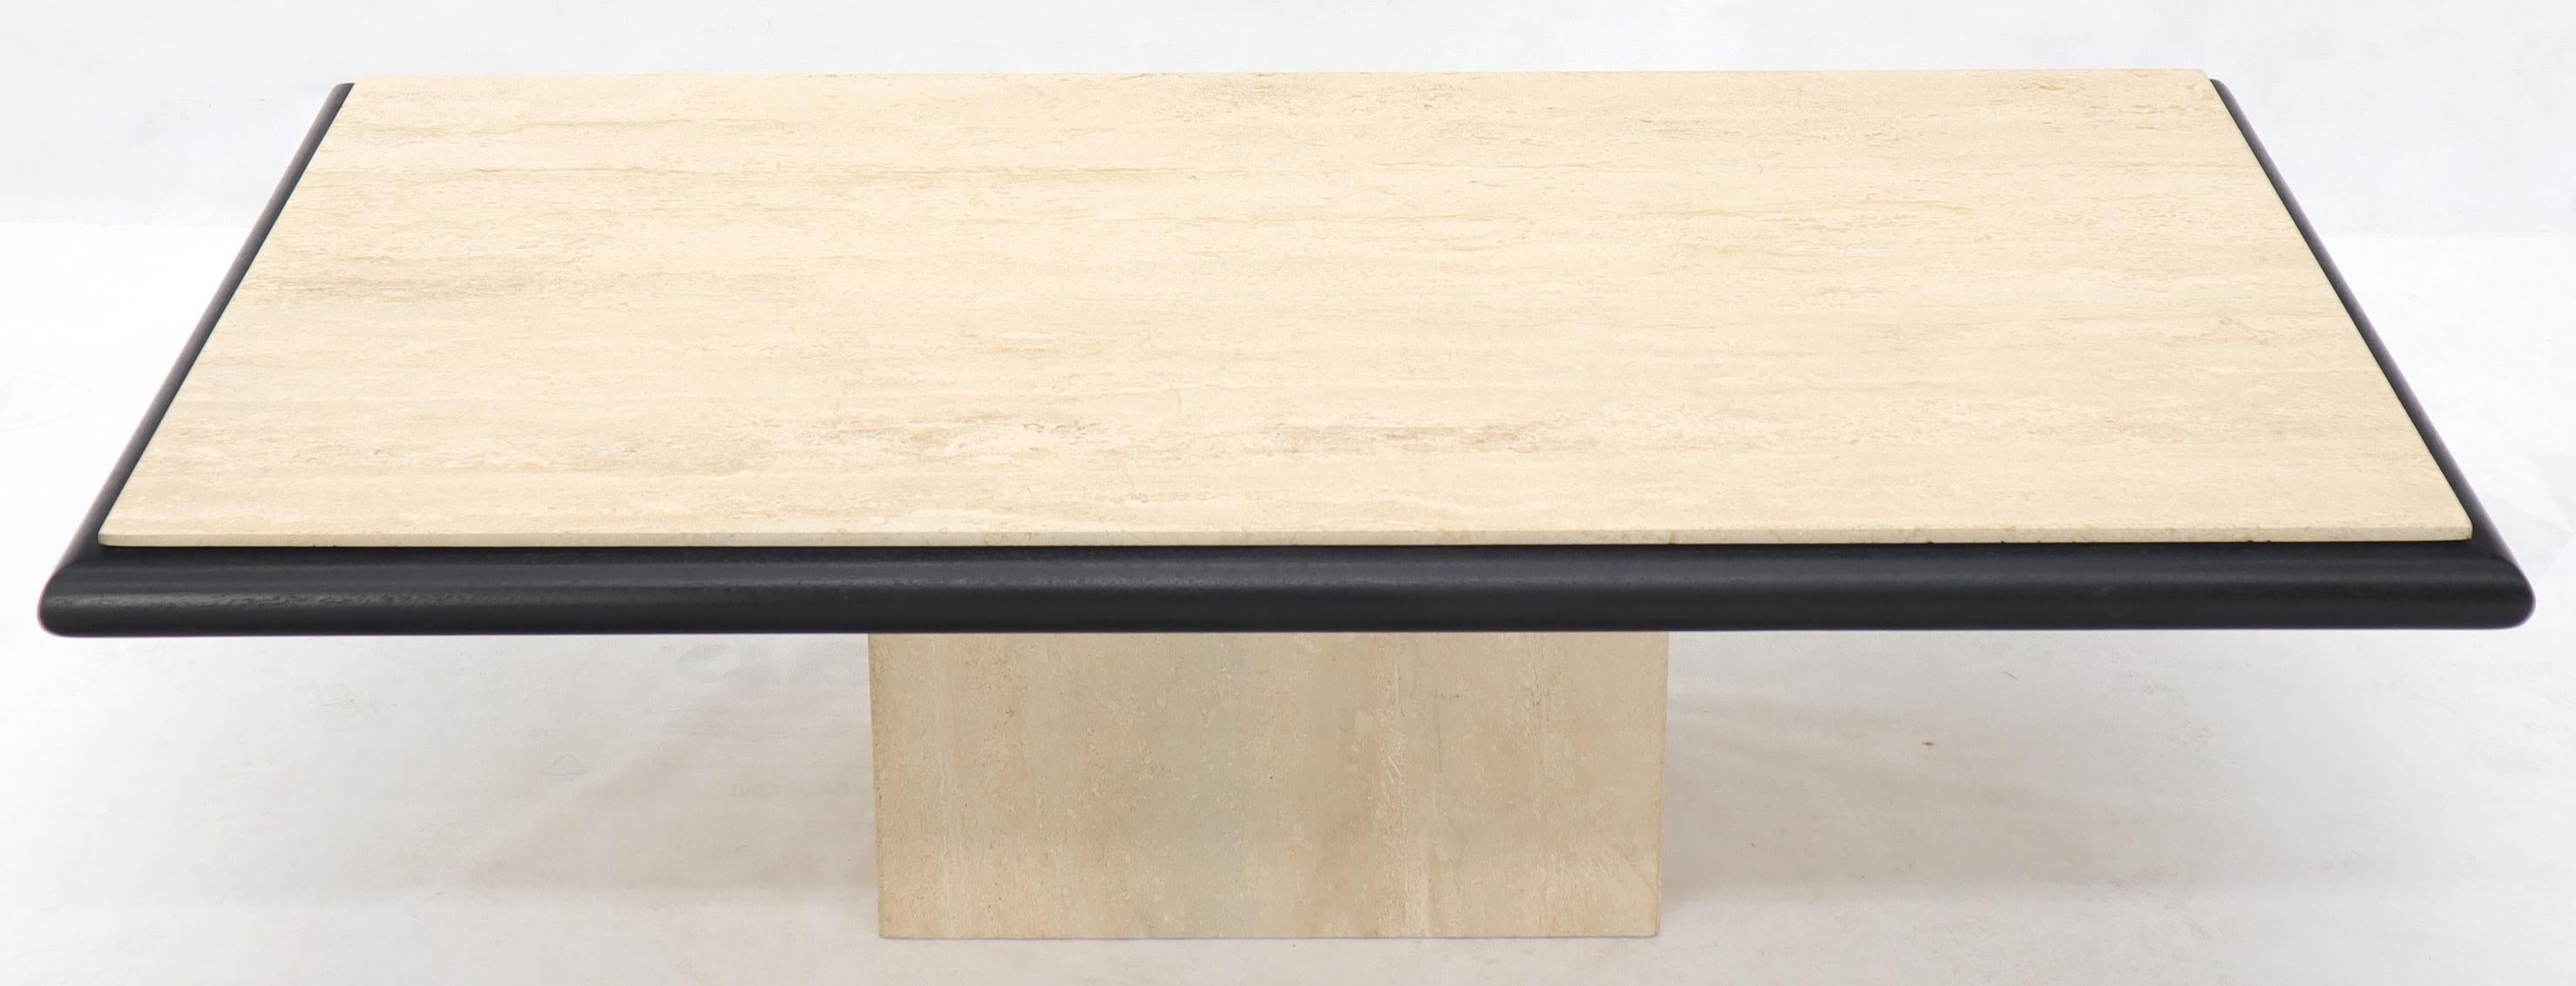 Lacquered Italian Rectangle Travertine Coffee Table